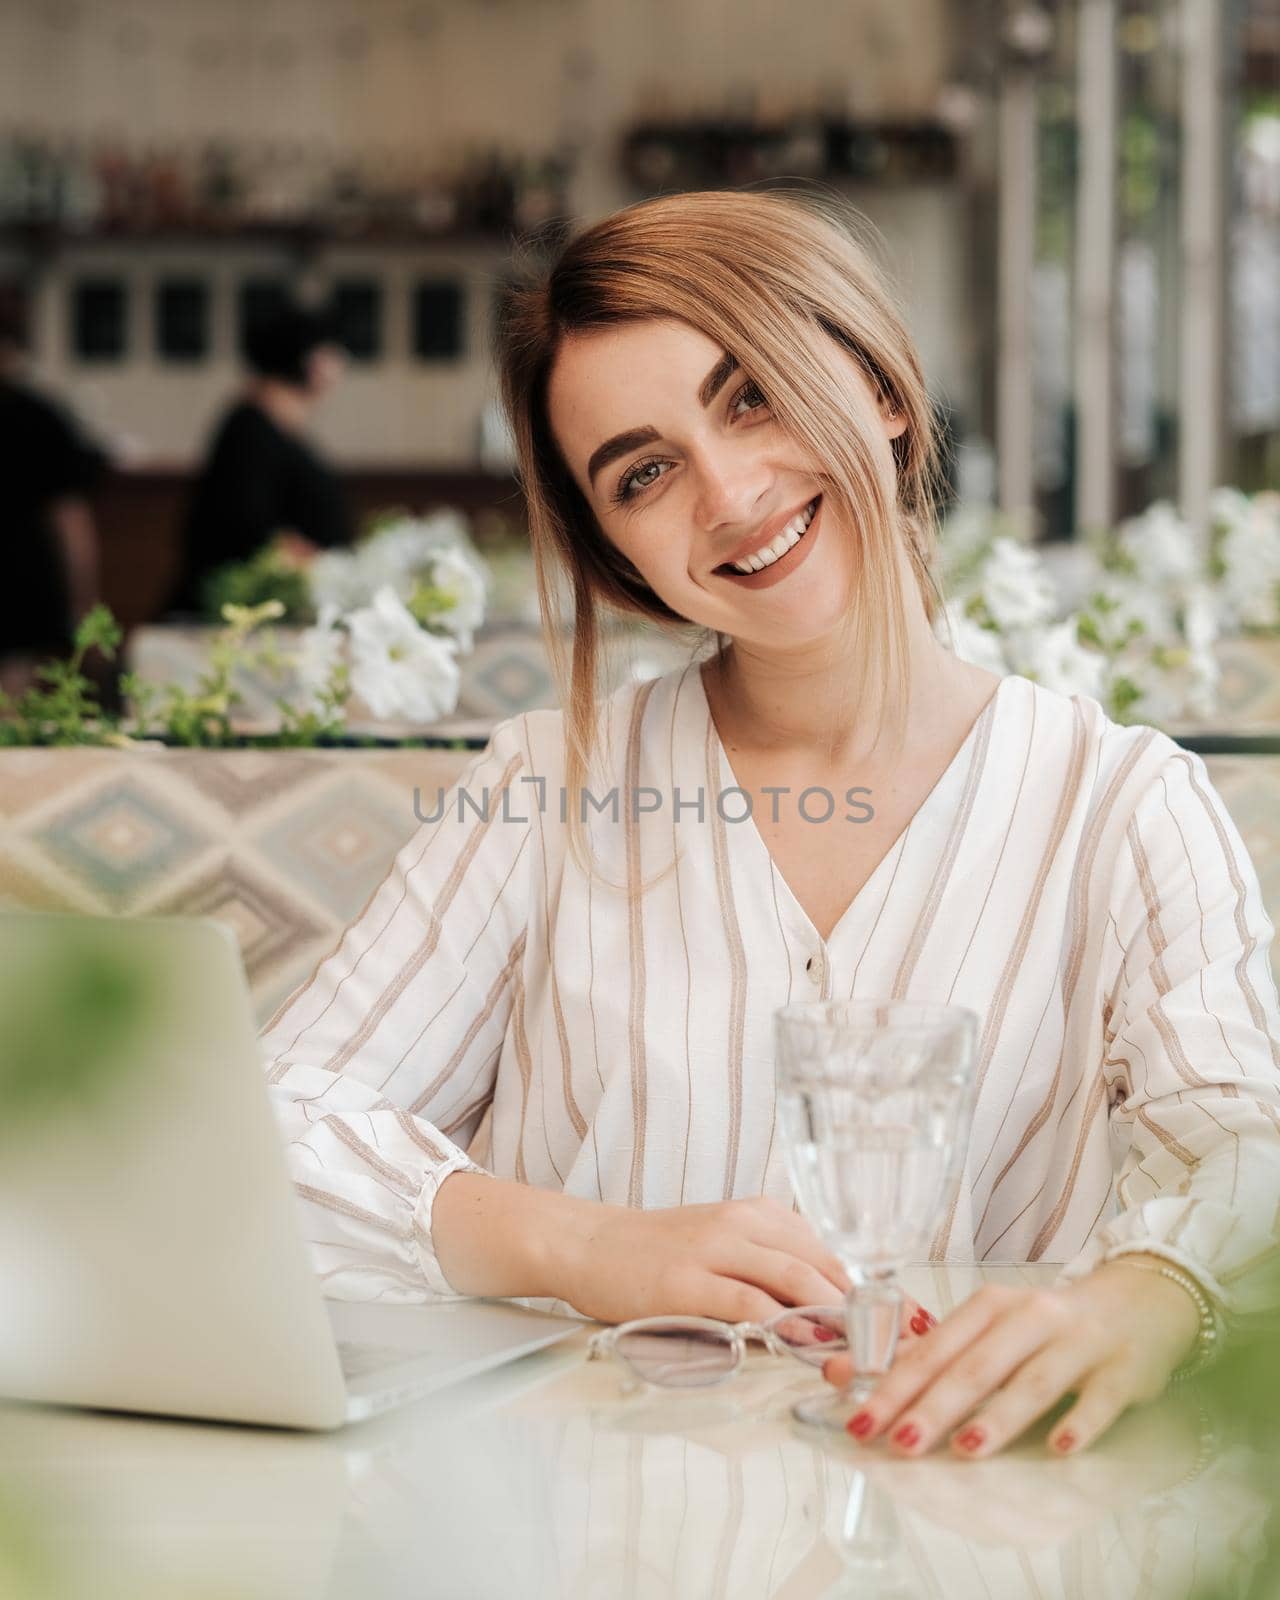 Cheerful Young Woman Smiling Straight Into the Camera, Female Working on Laptop While Having Lunch in Restaurant